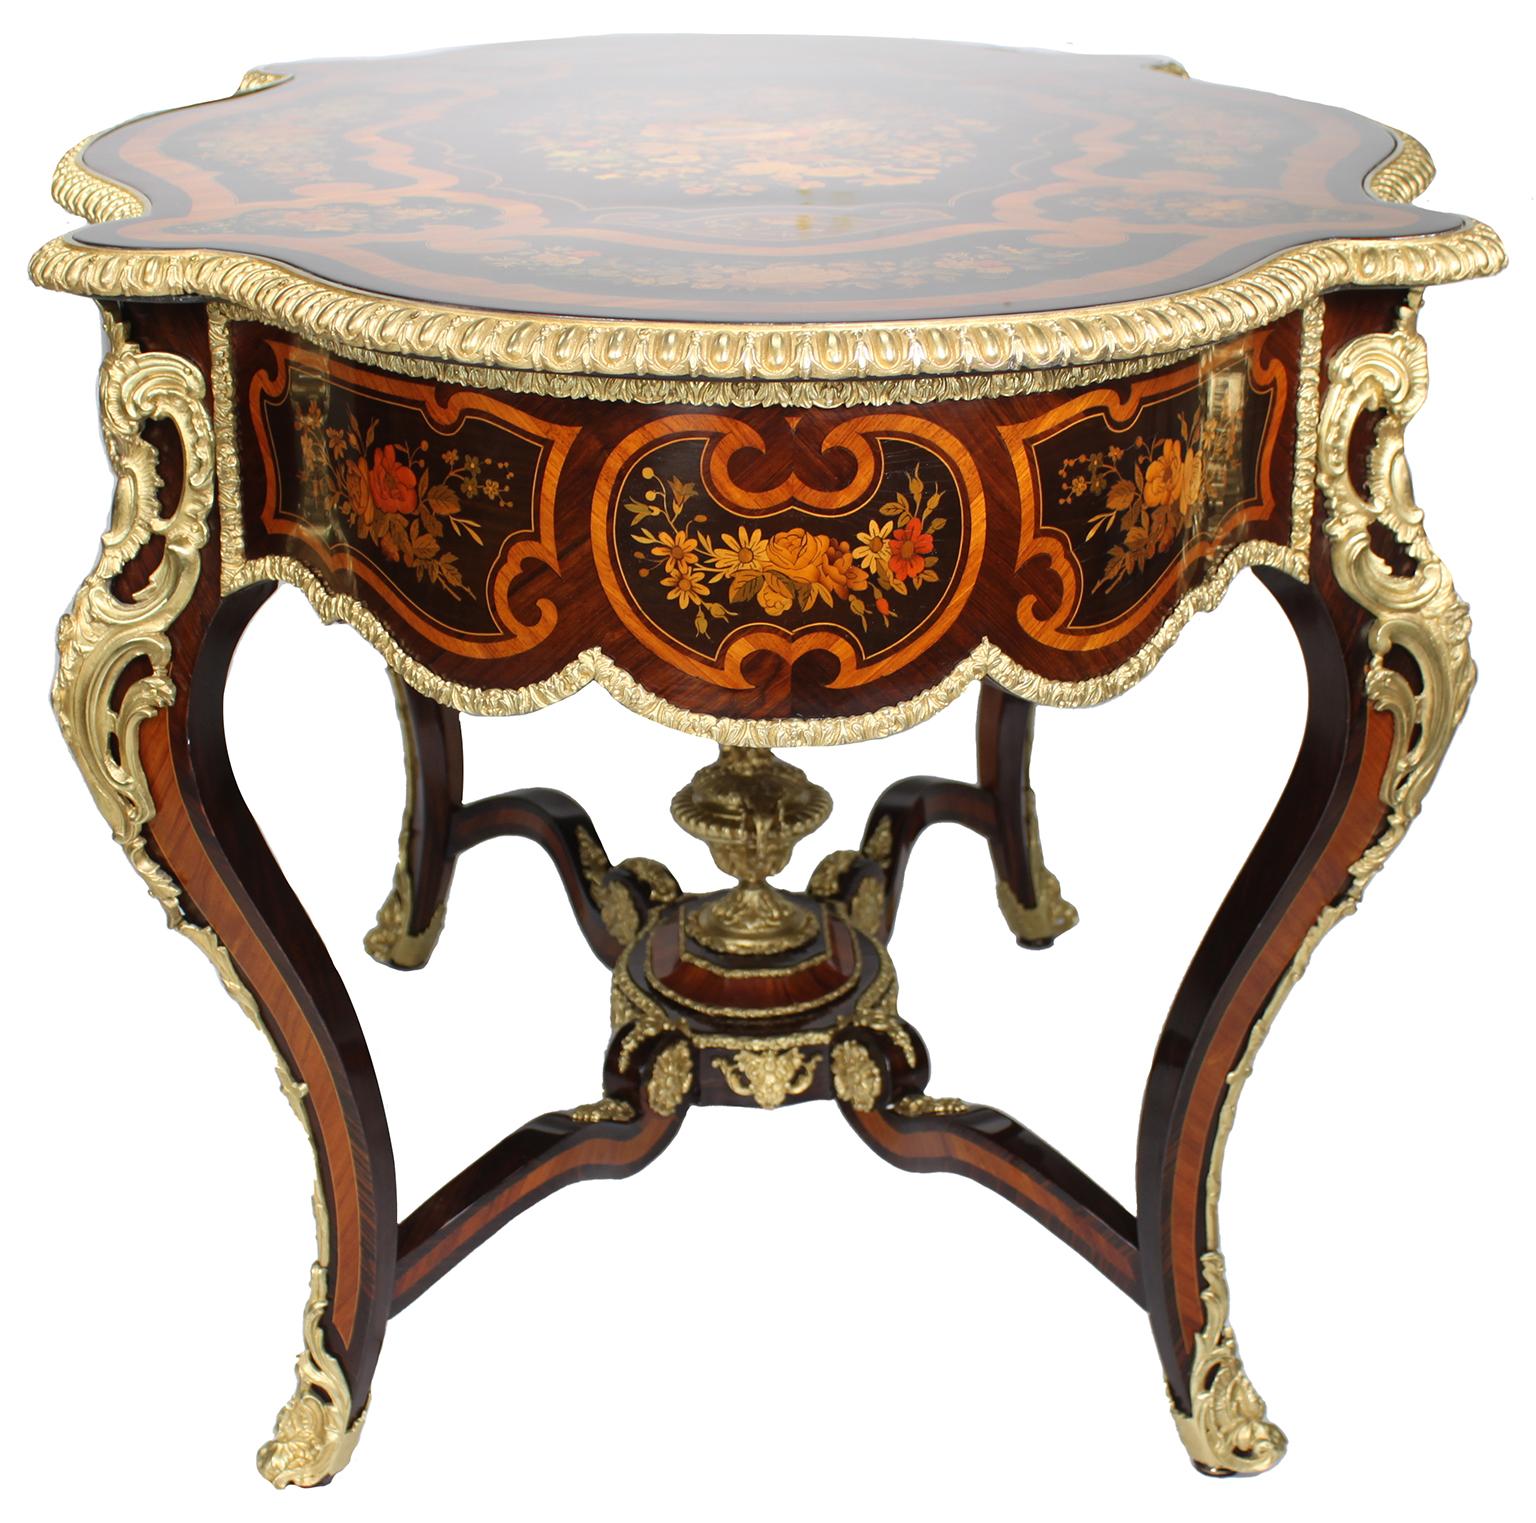 French 19th Century Louis XV Style Gilt-Bronze Mounted Marquetry Center Table For Sale 6